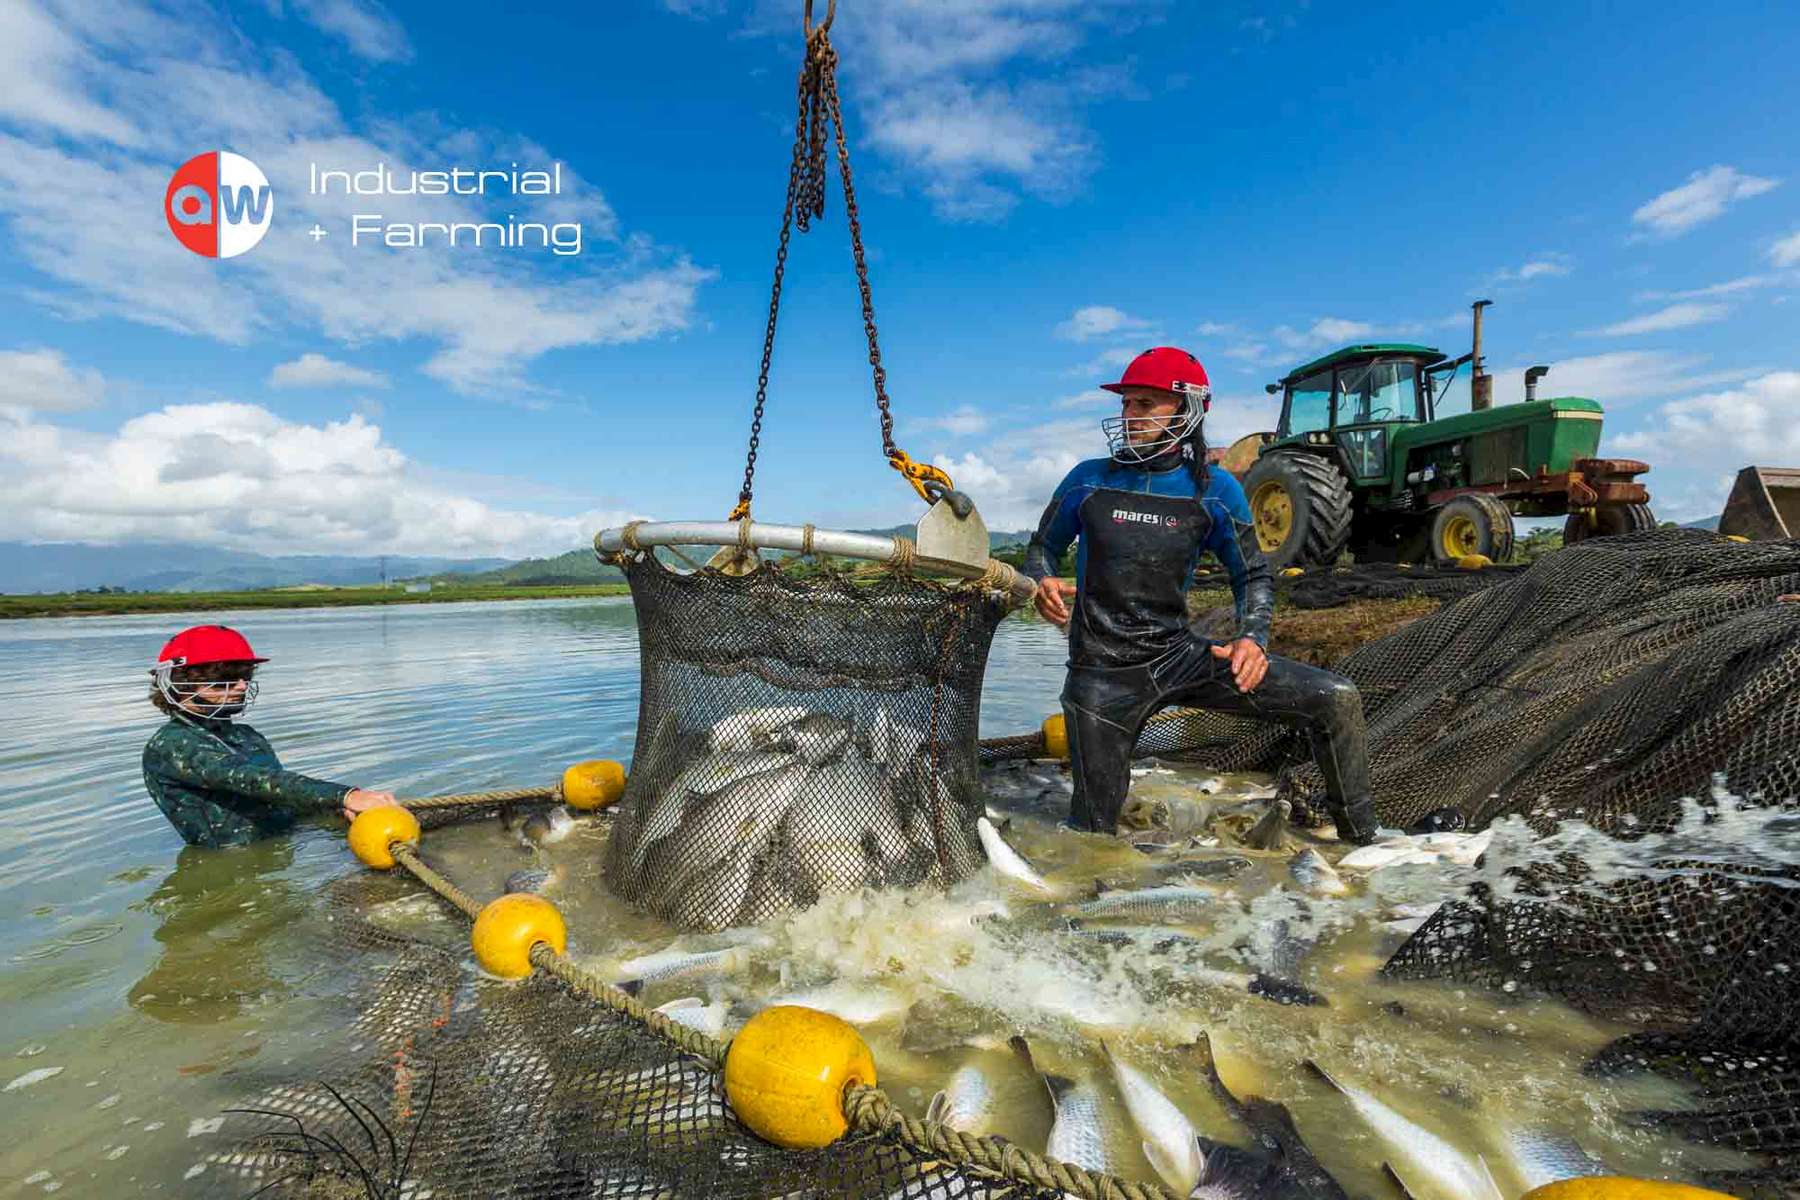 Workers haul live Barramundi from ponds of a fish farm near Cairns - industrail photographer